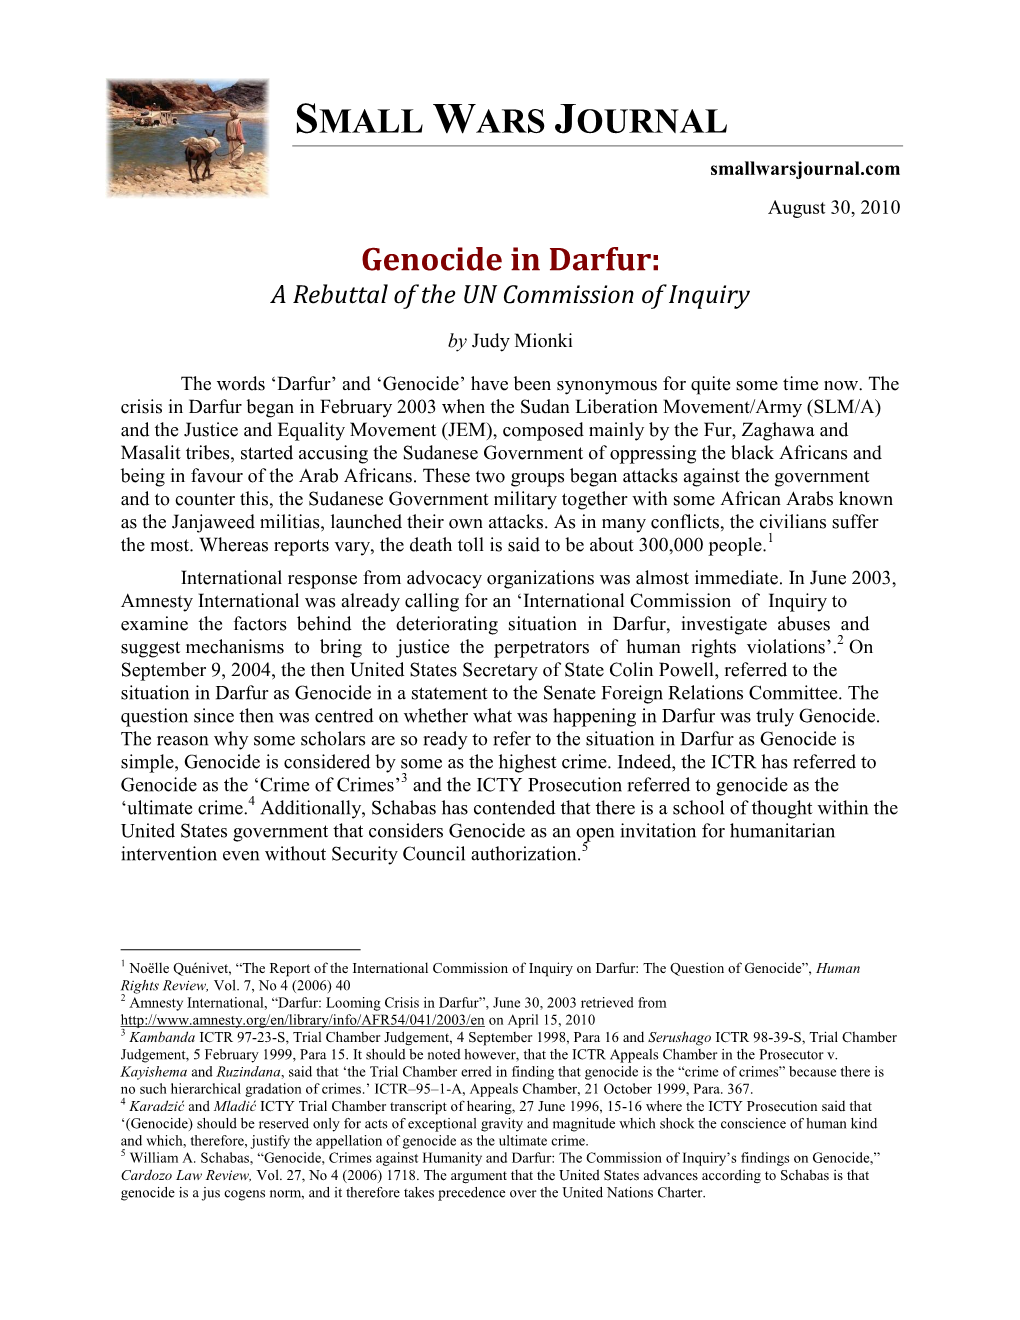 Genocide in Darfur: a Rebuttal of the UN Commission of Inquiry